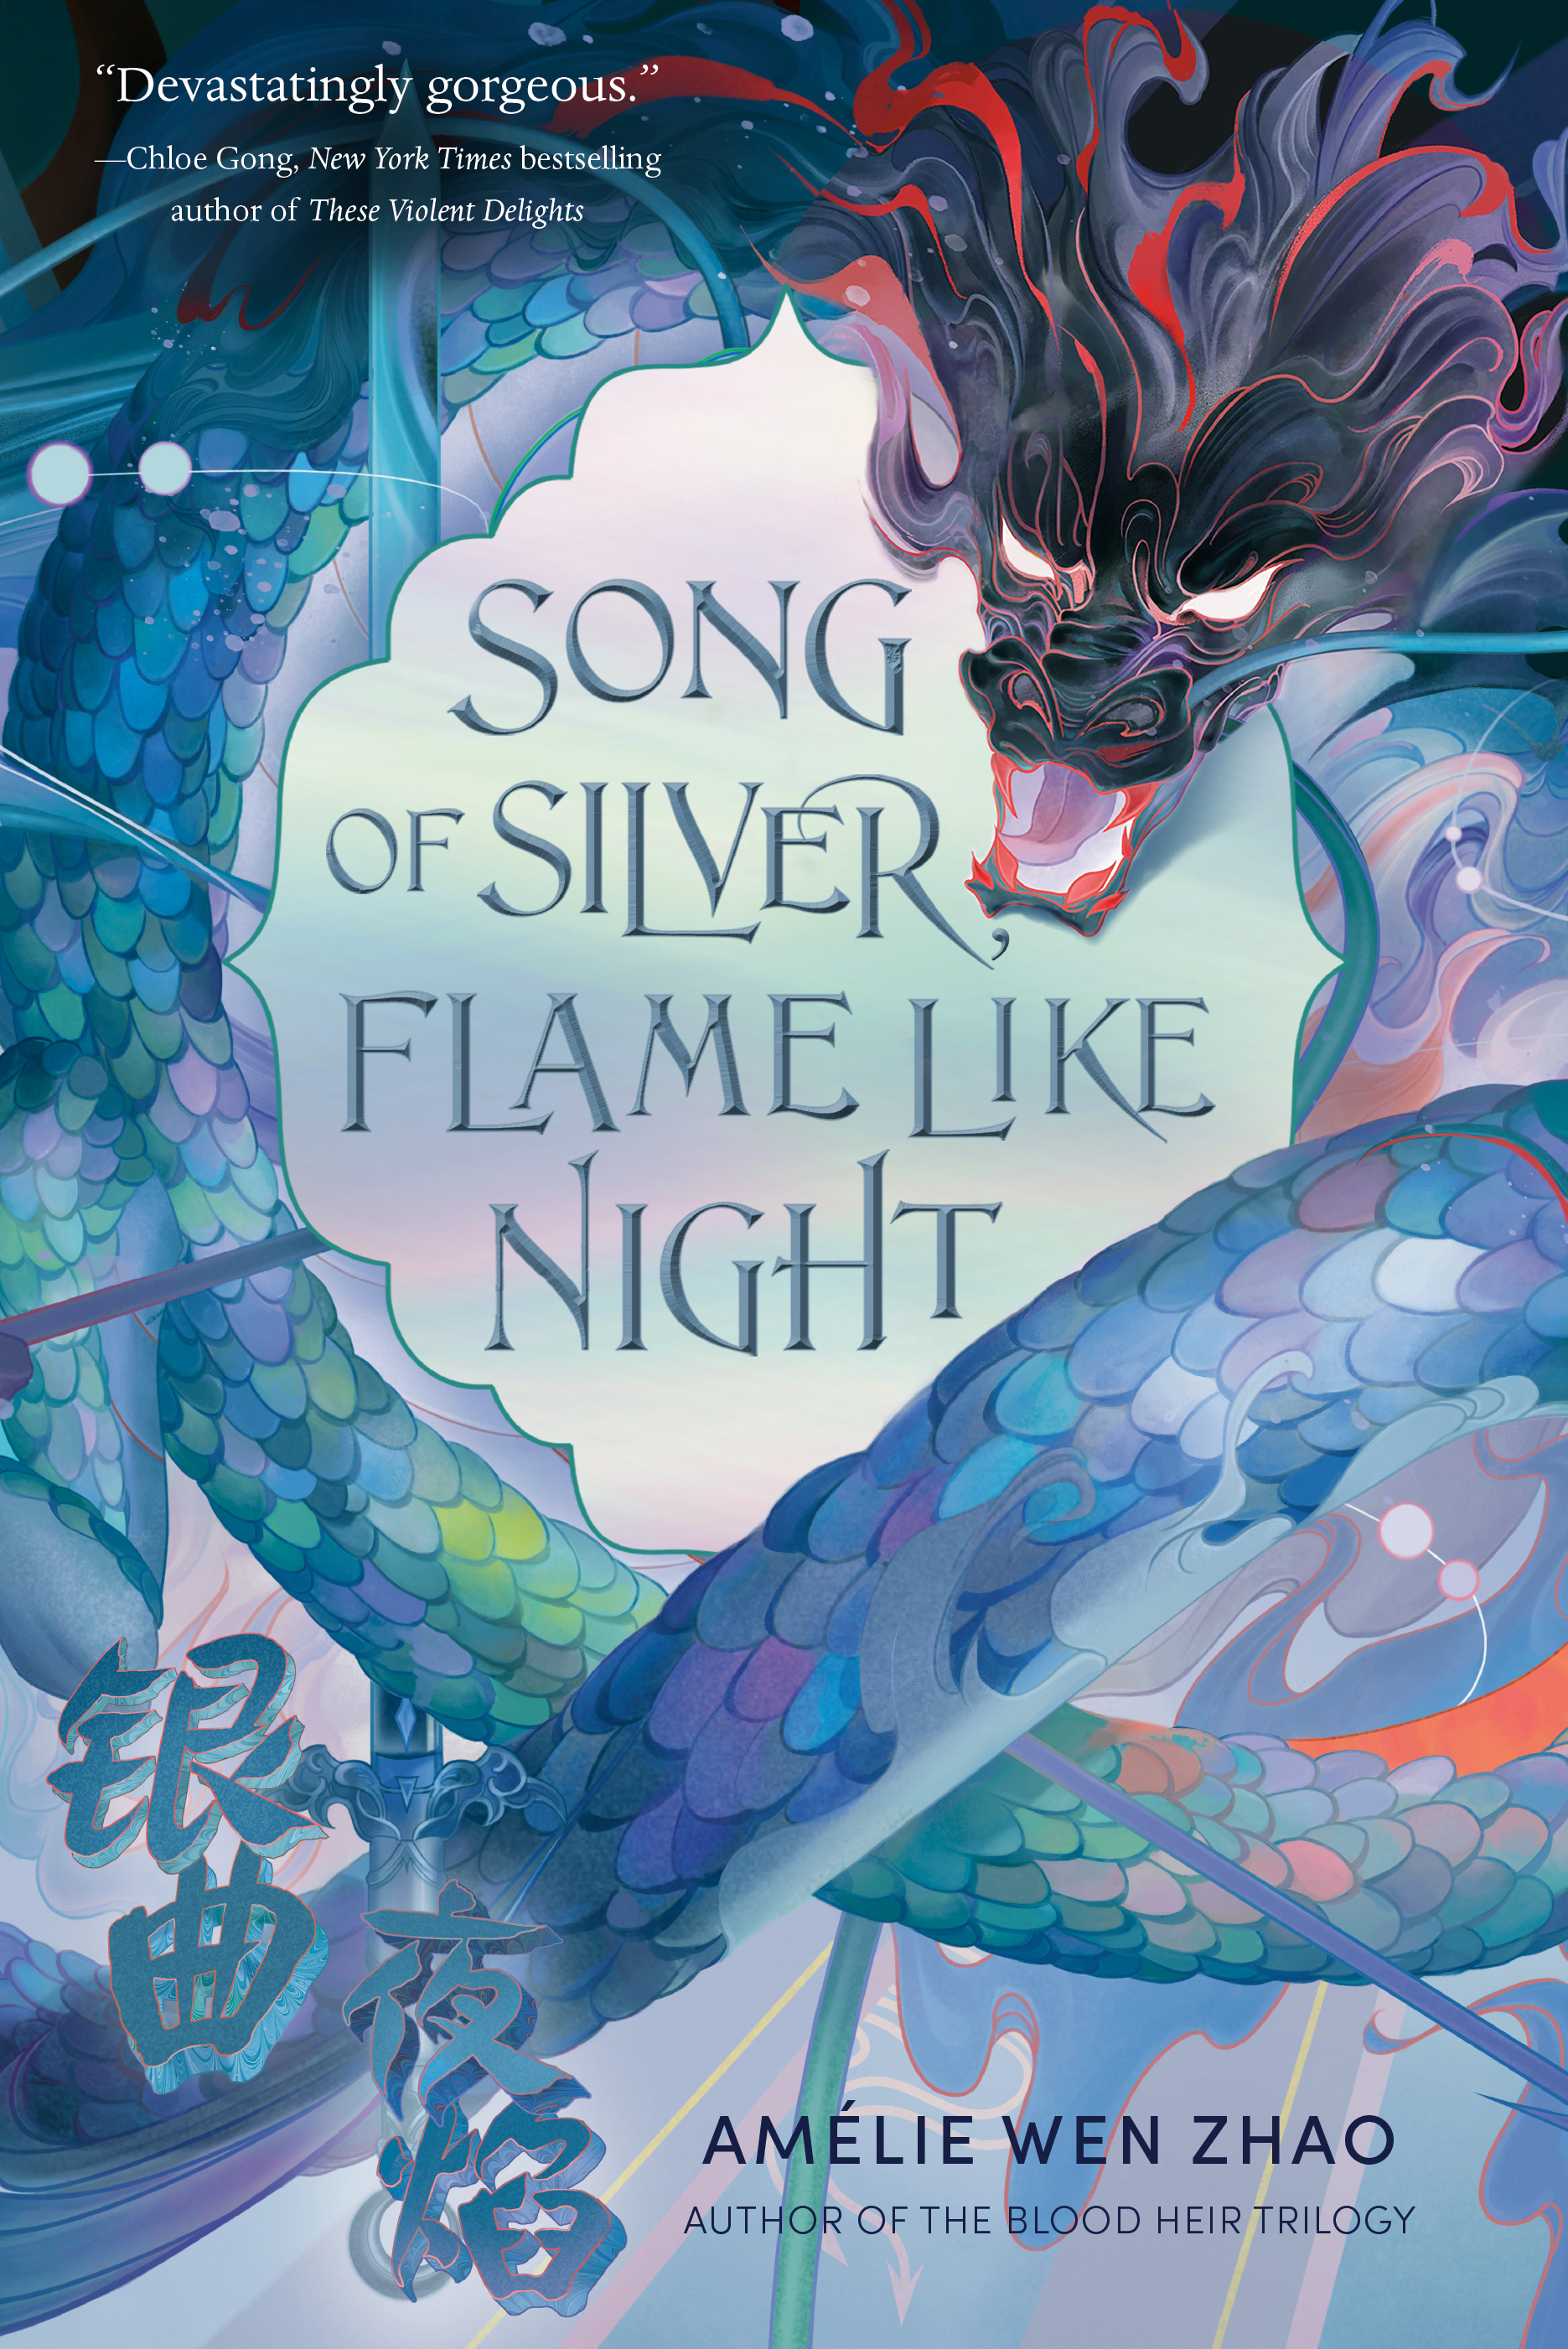 Song of the Last Kingdom Vol.01 - Song of Silver, Flame Like Night | Zhao, Amélie Wen (Auteur)